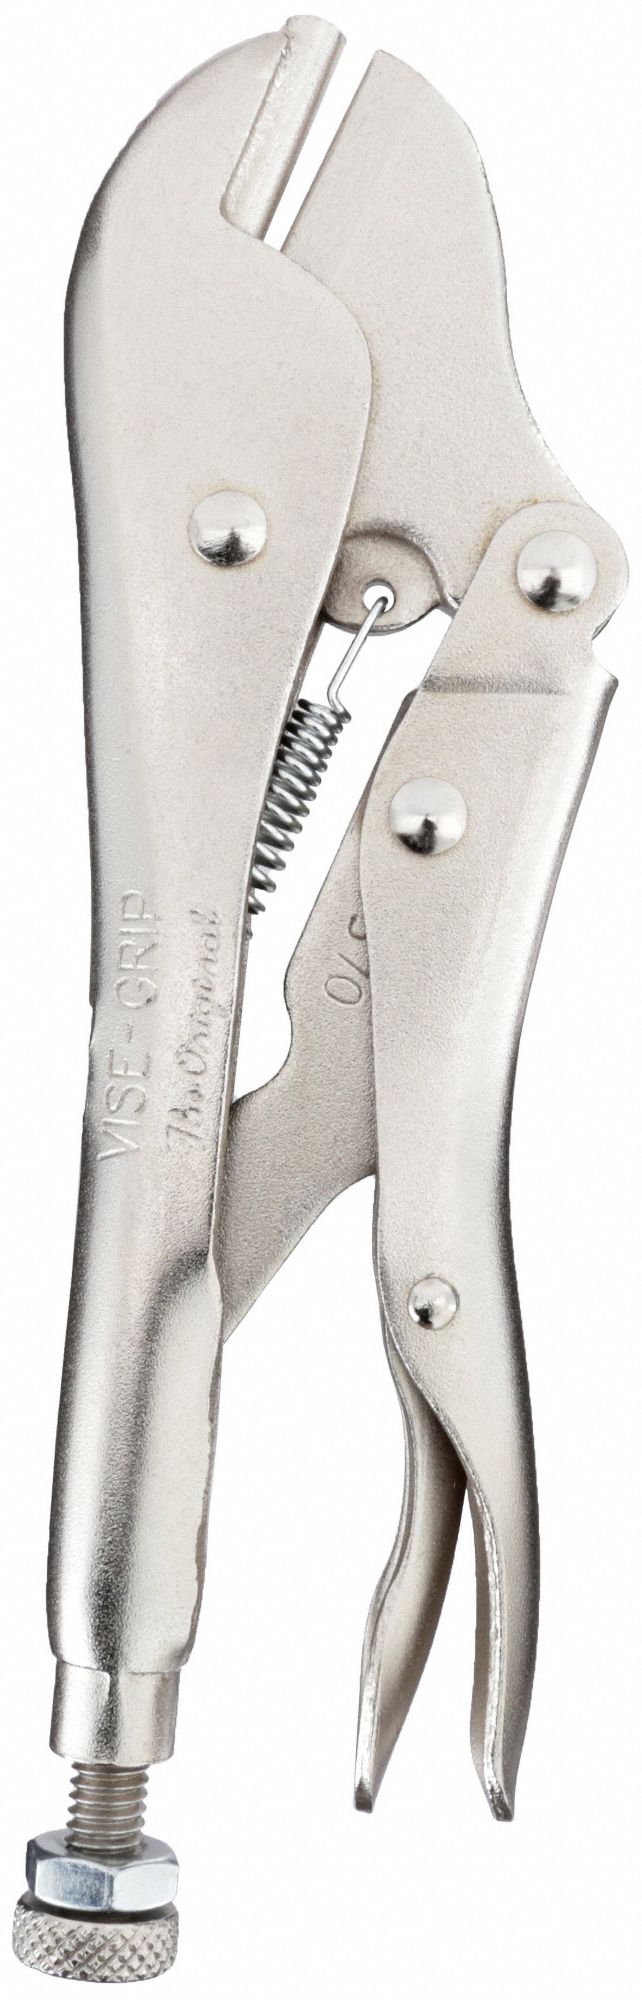 Locking Plier: Flat, Lever, 1/4 in Max Jaw Opening, 7 in Overall Lg, 1 1/4  in Jaw Lg, Plain Grip